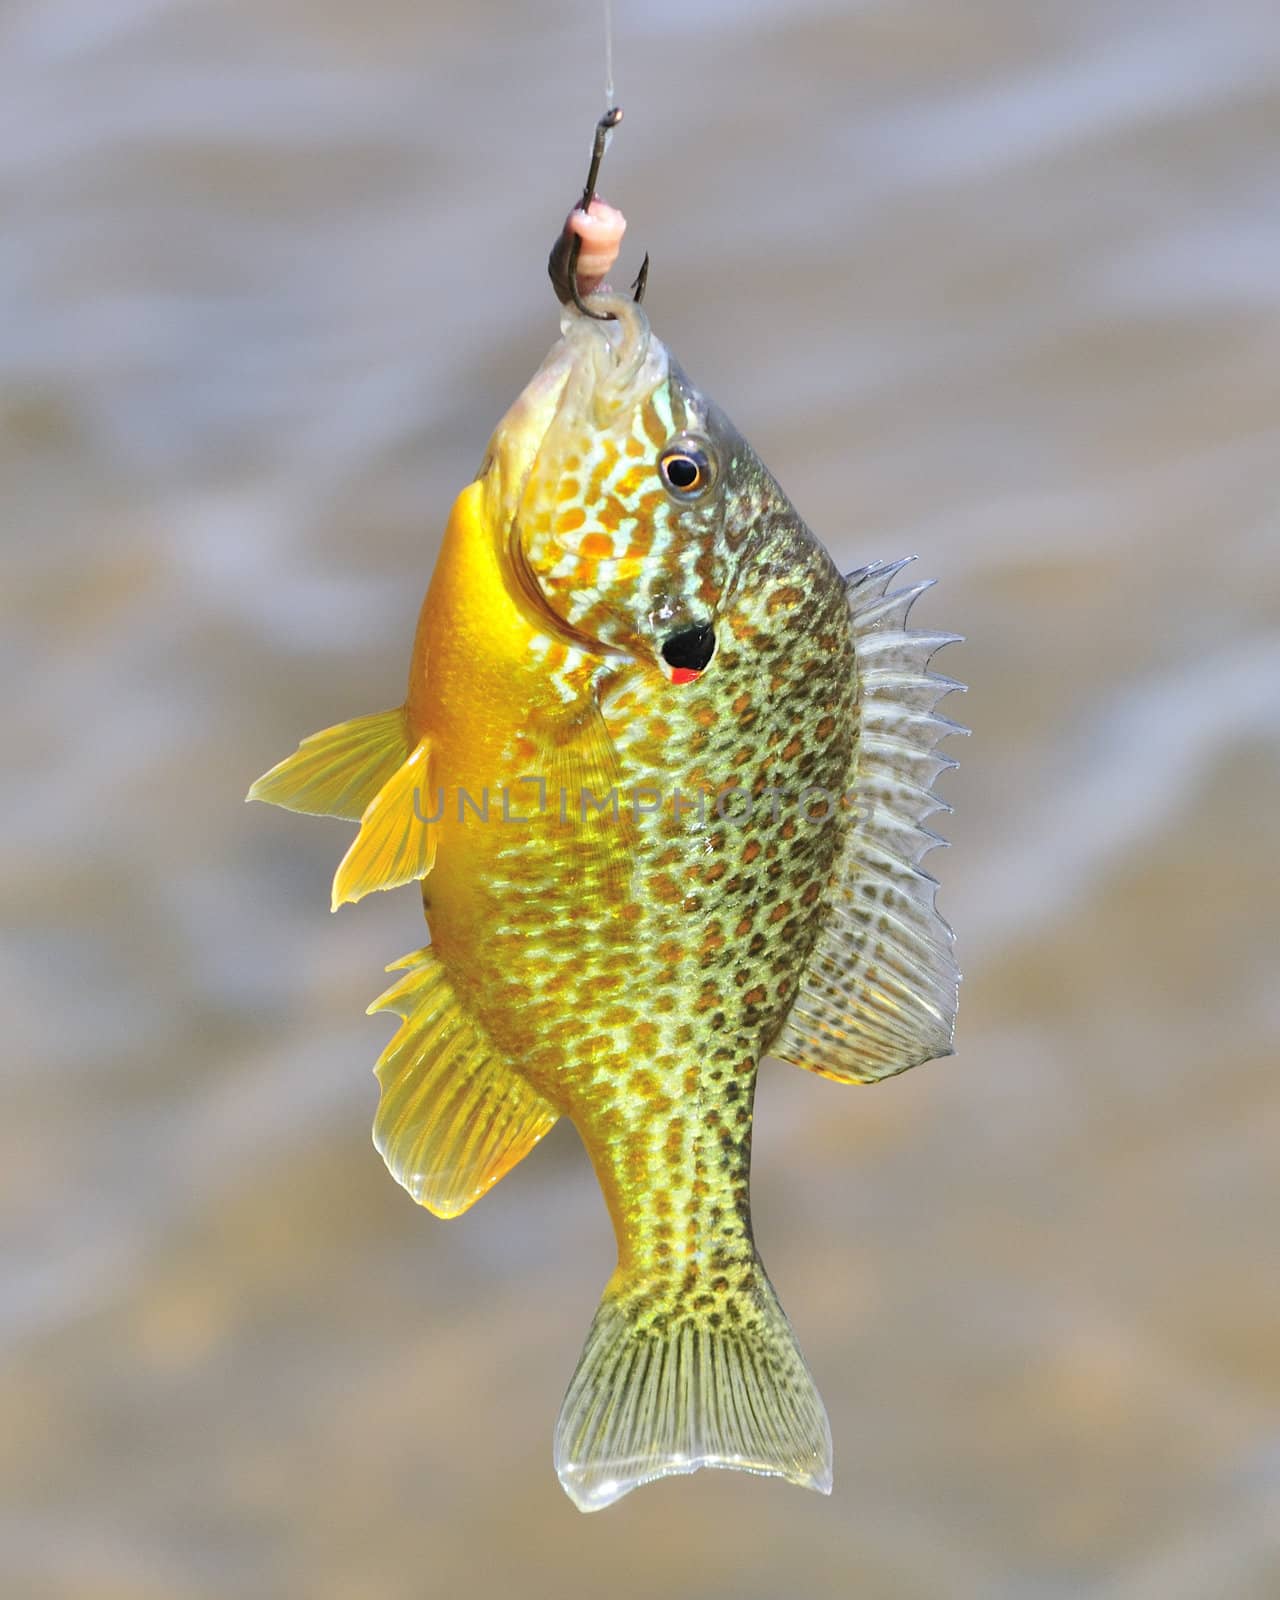 A freshwater sunfish caught on a fish hook.